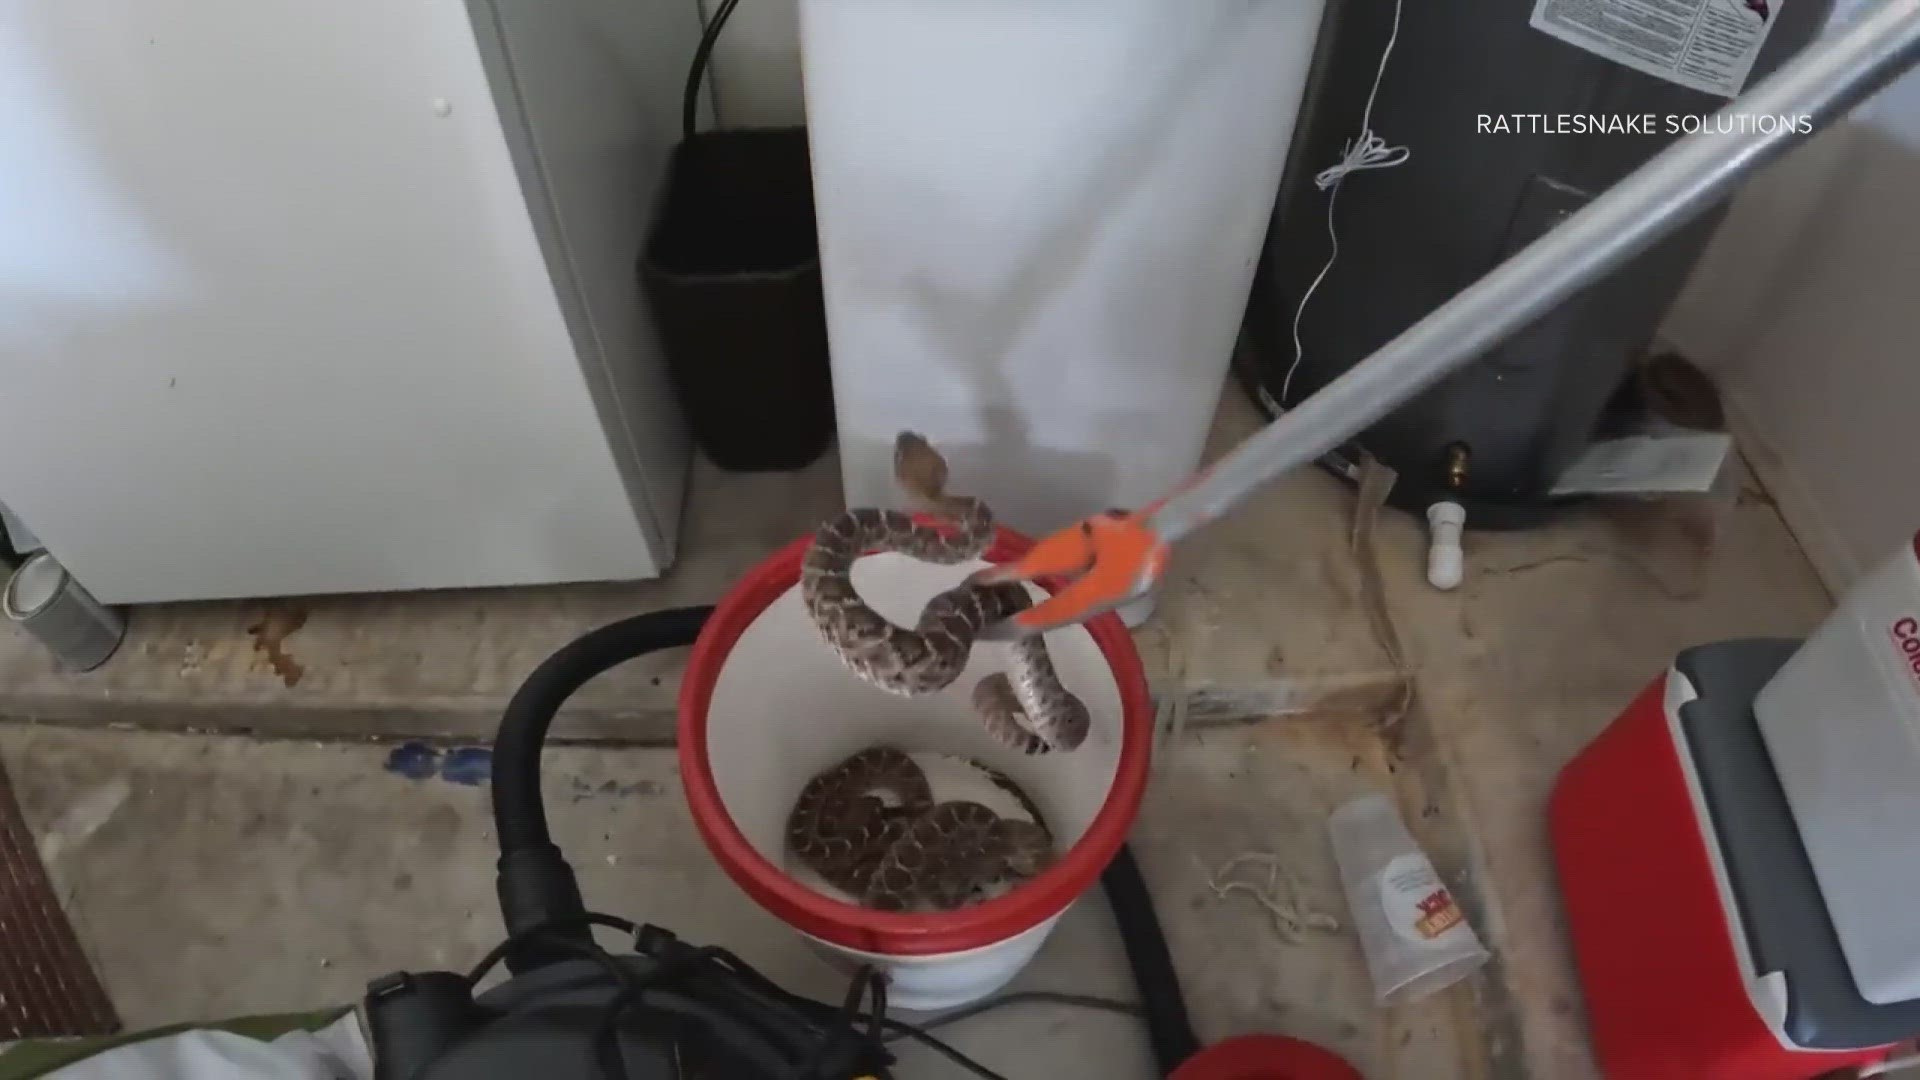 Snake wrangler Marissa Maki found most of the rattlers coiled around the base of a hot water heater in the unidentified homeowner’s cluttered garage Tuesday.